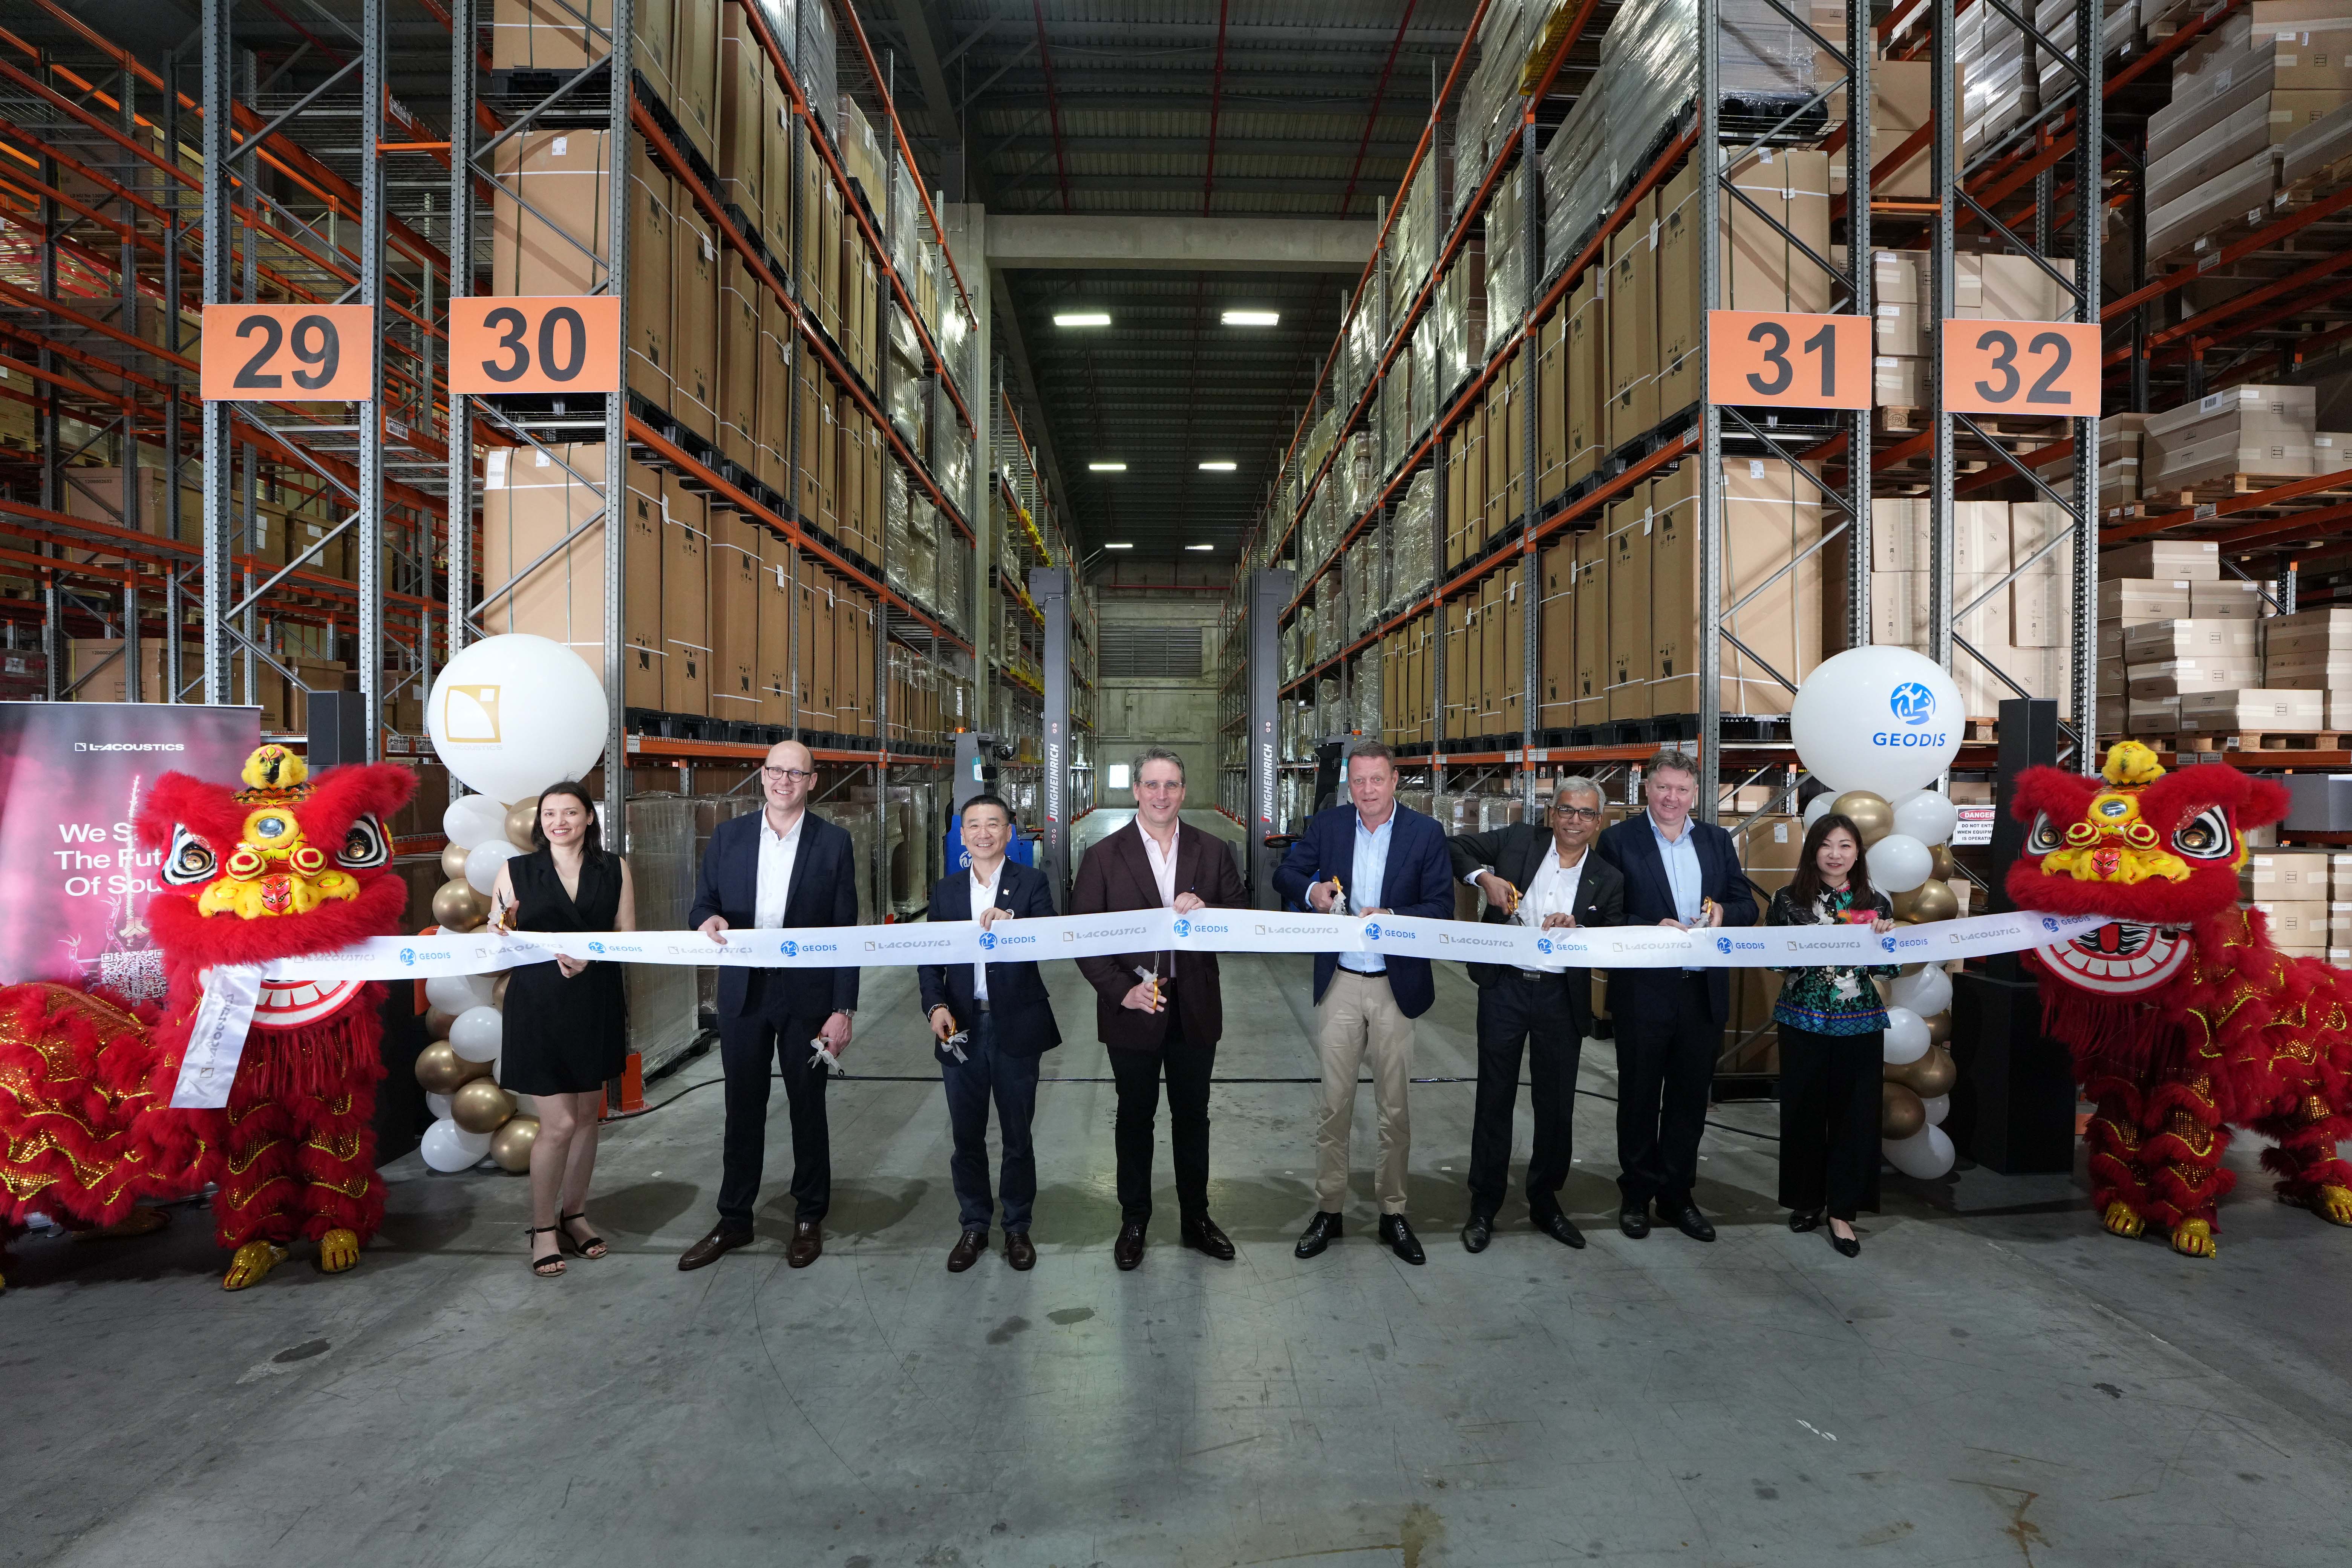 L-Acoustics and GEODIS announce the opening of a Regional Distribution Centre in Singapore